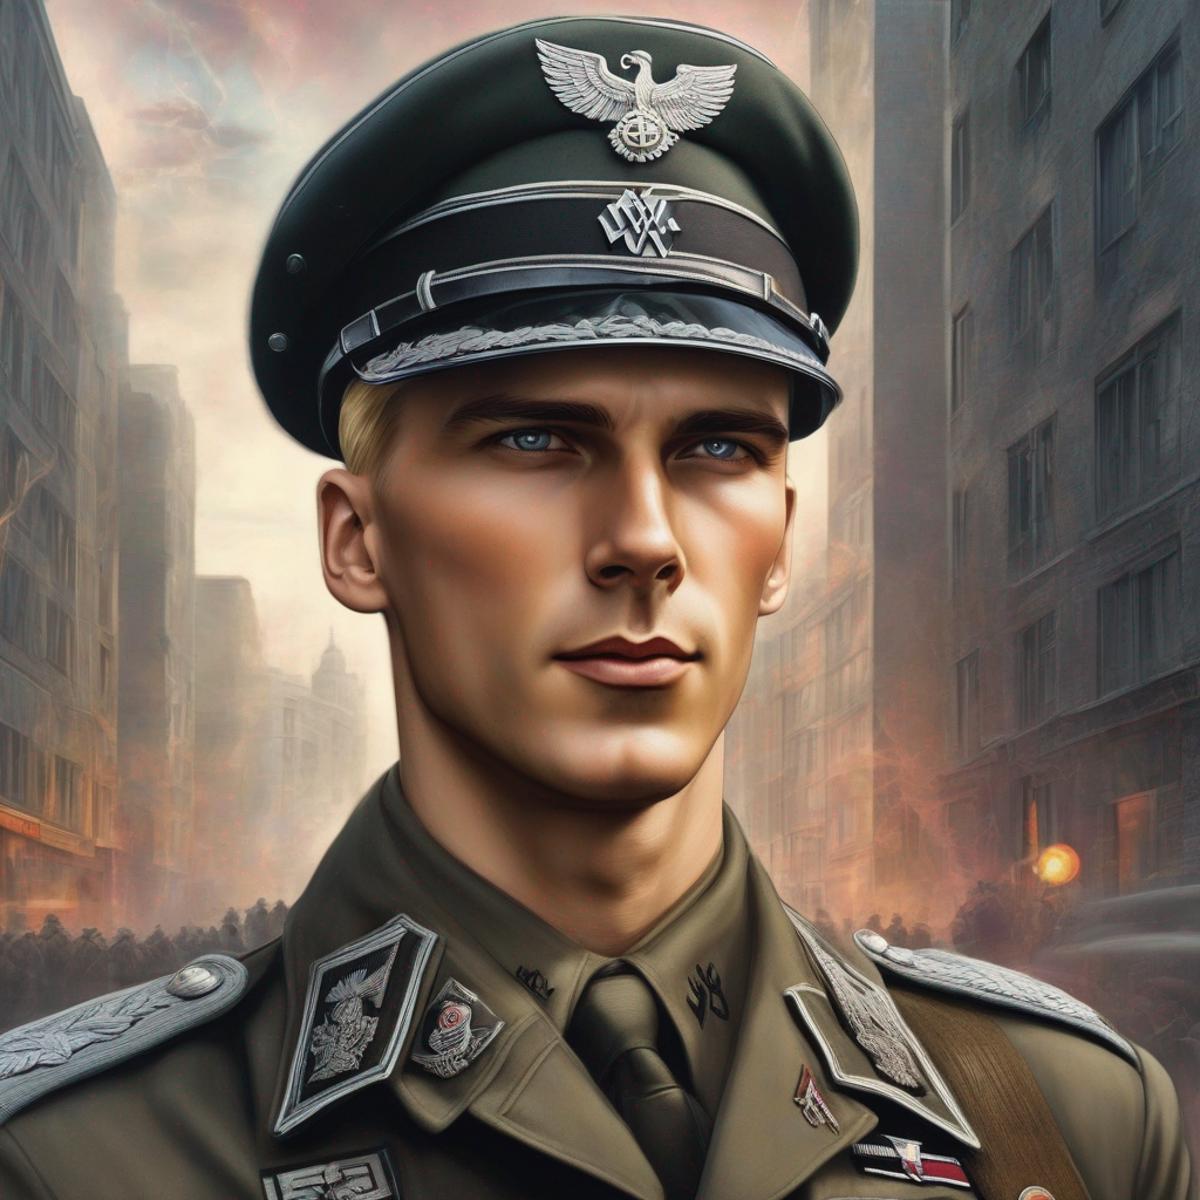 Photo of Handsome WW2 era Waffen-SS officer with light blonde hair, unrestricted universal love, improve coloring, transpa...